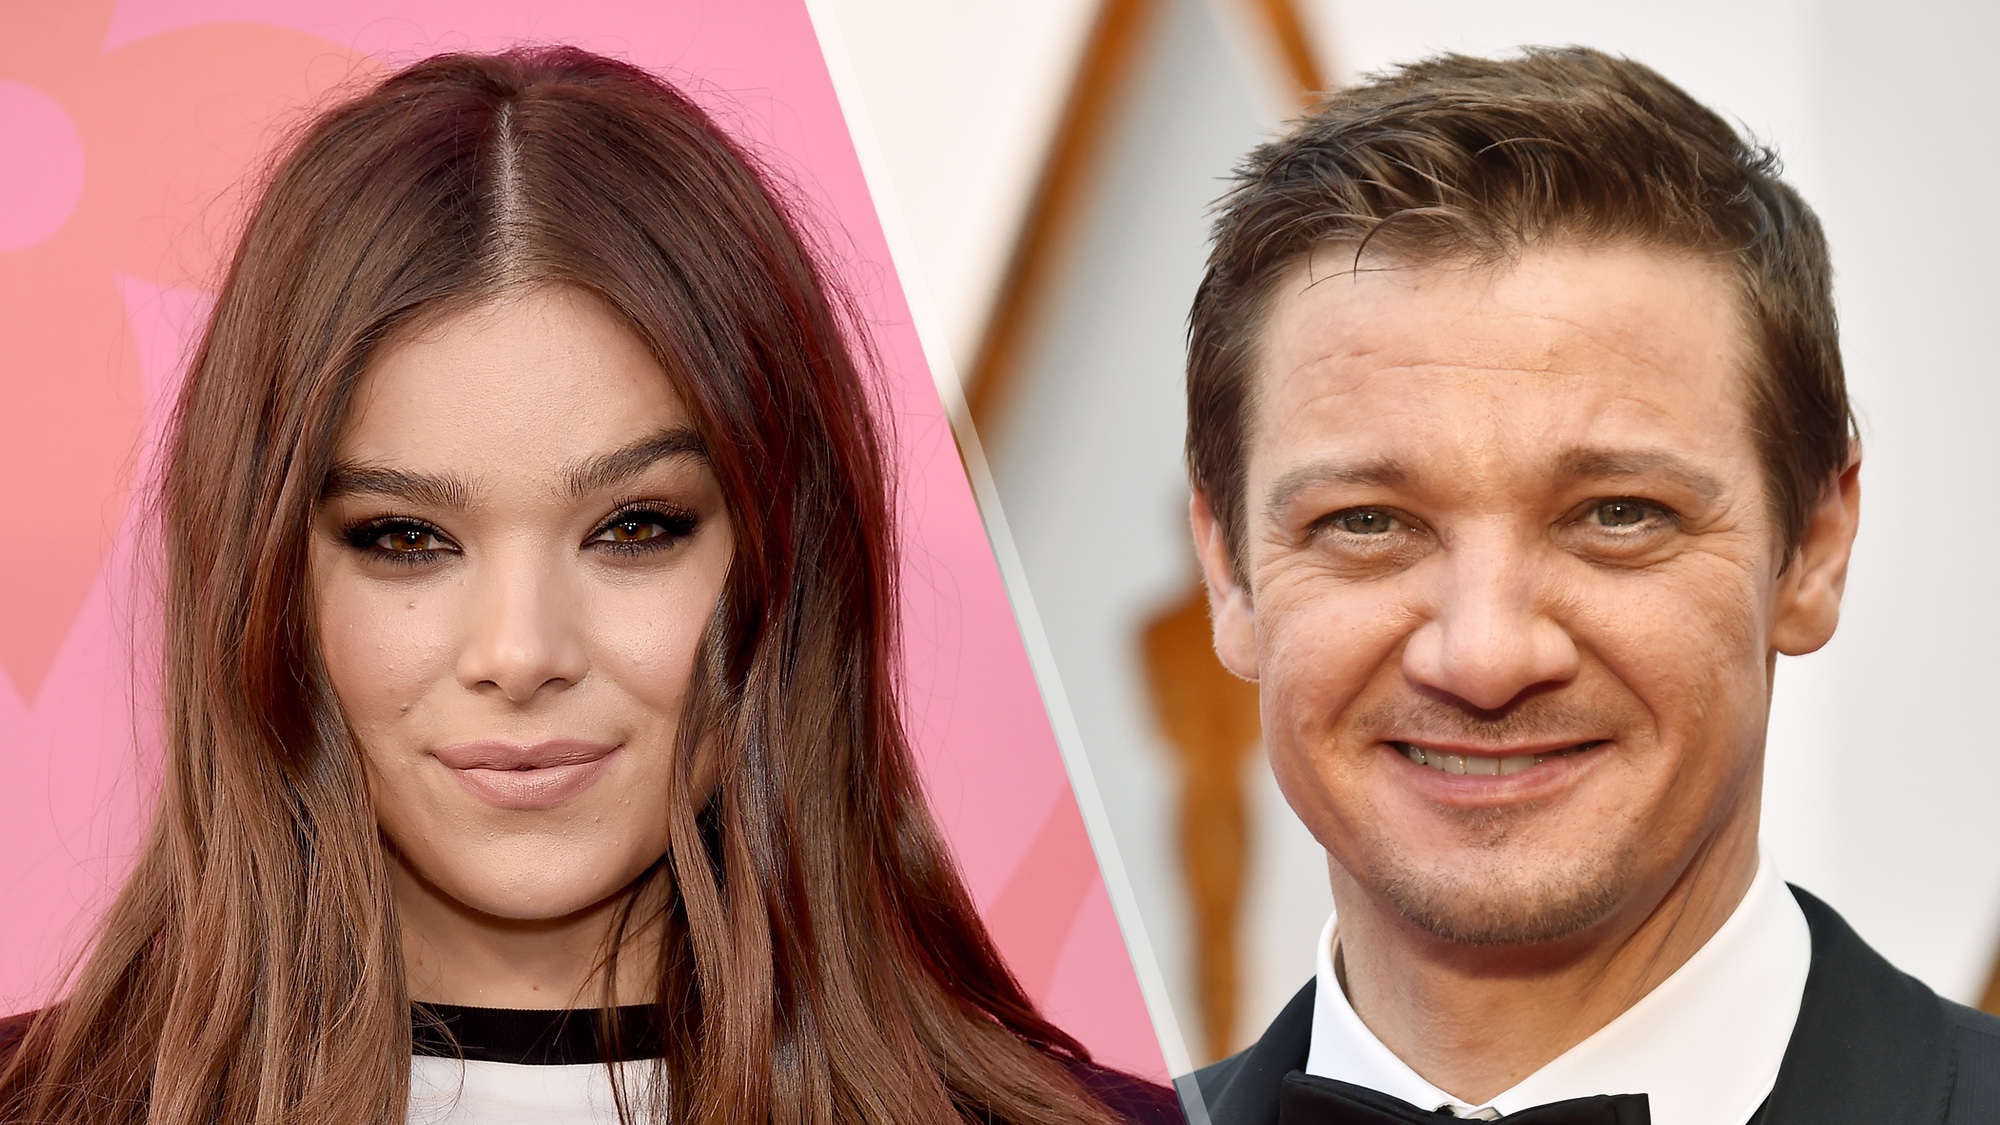 Hailee Steinfeld and Jeremy Renner will star in the Hawkeye Disney Plus show , one of the upcoming marvel shows